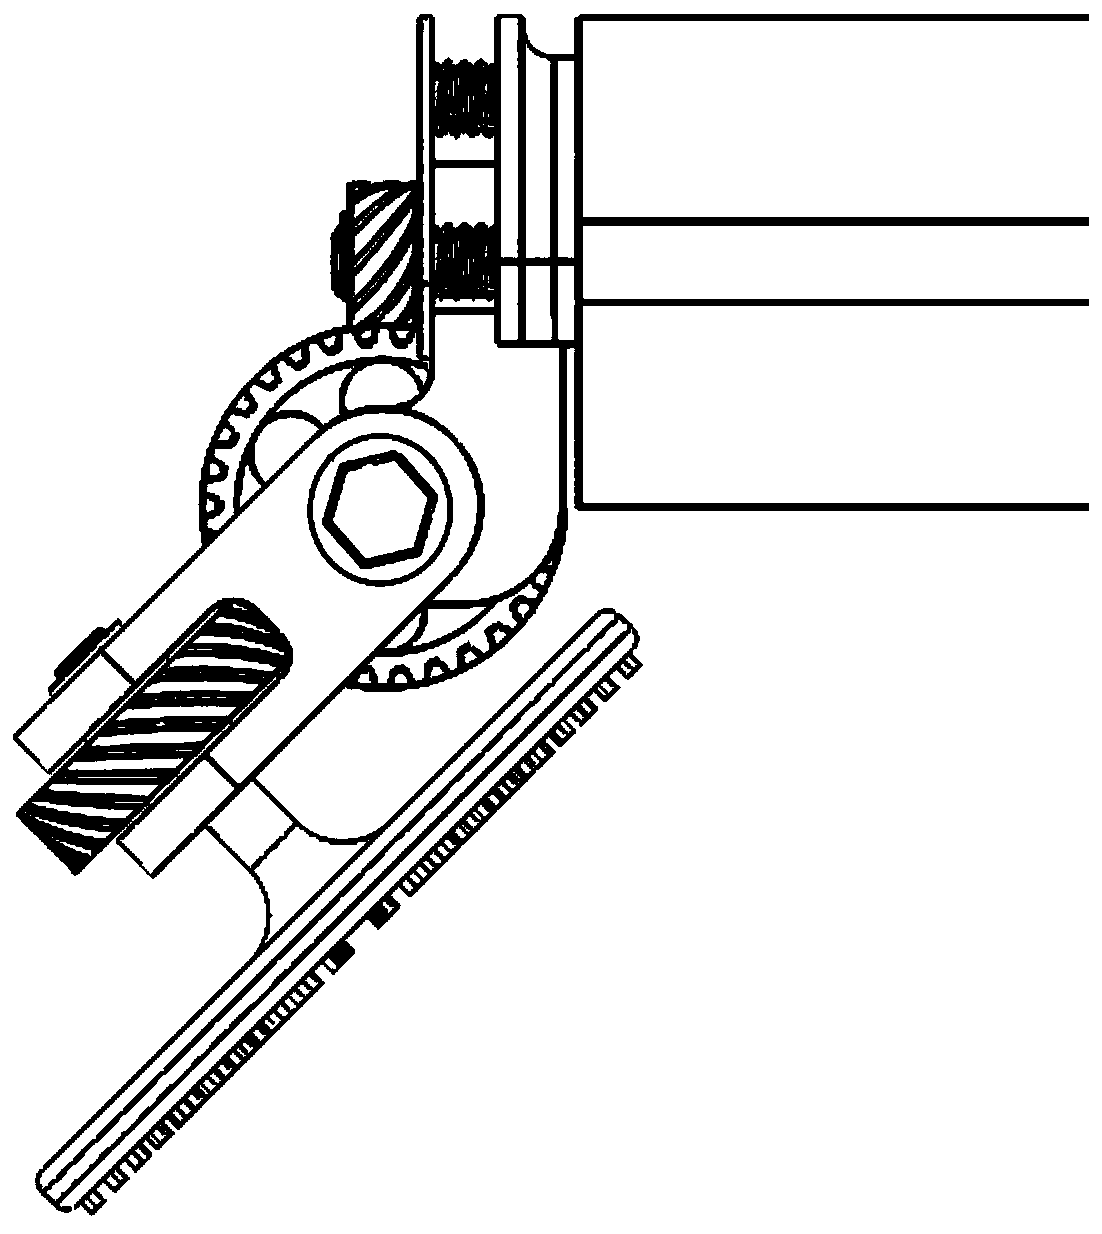 A grinding head mechanism of multi-degree-of-freedom polishing machine with adjustable angle